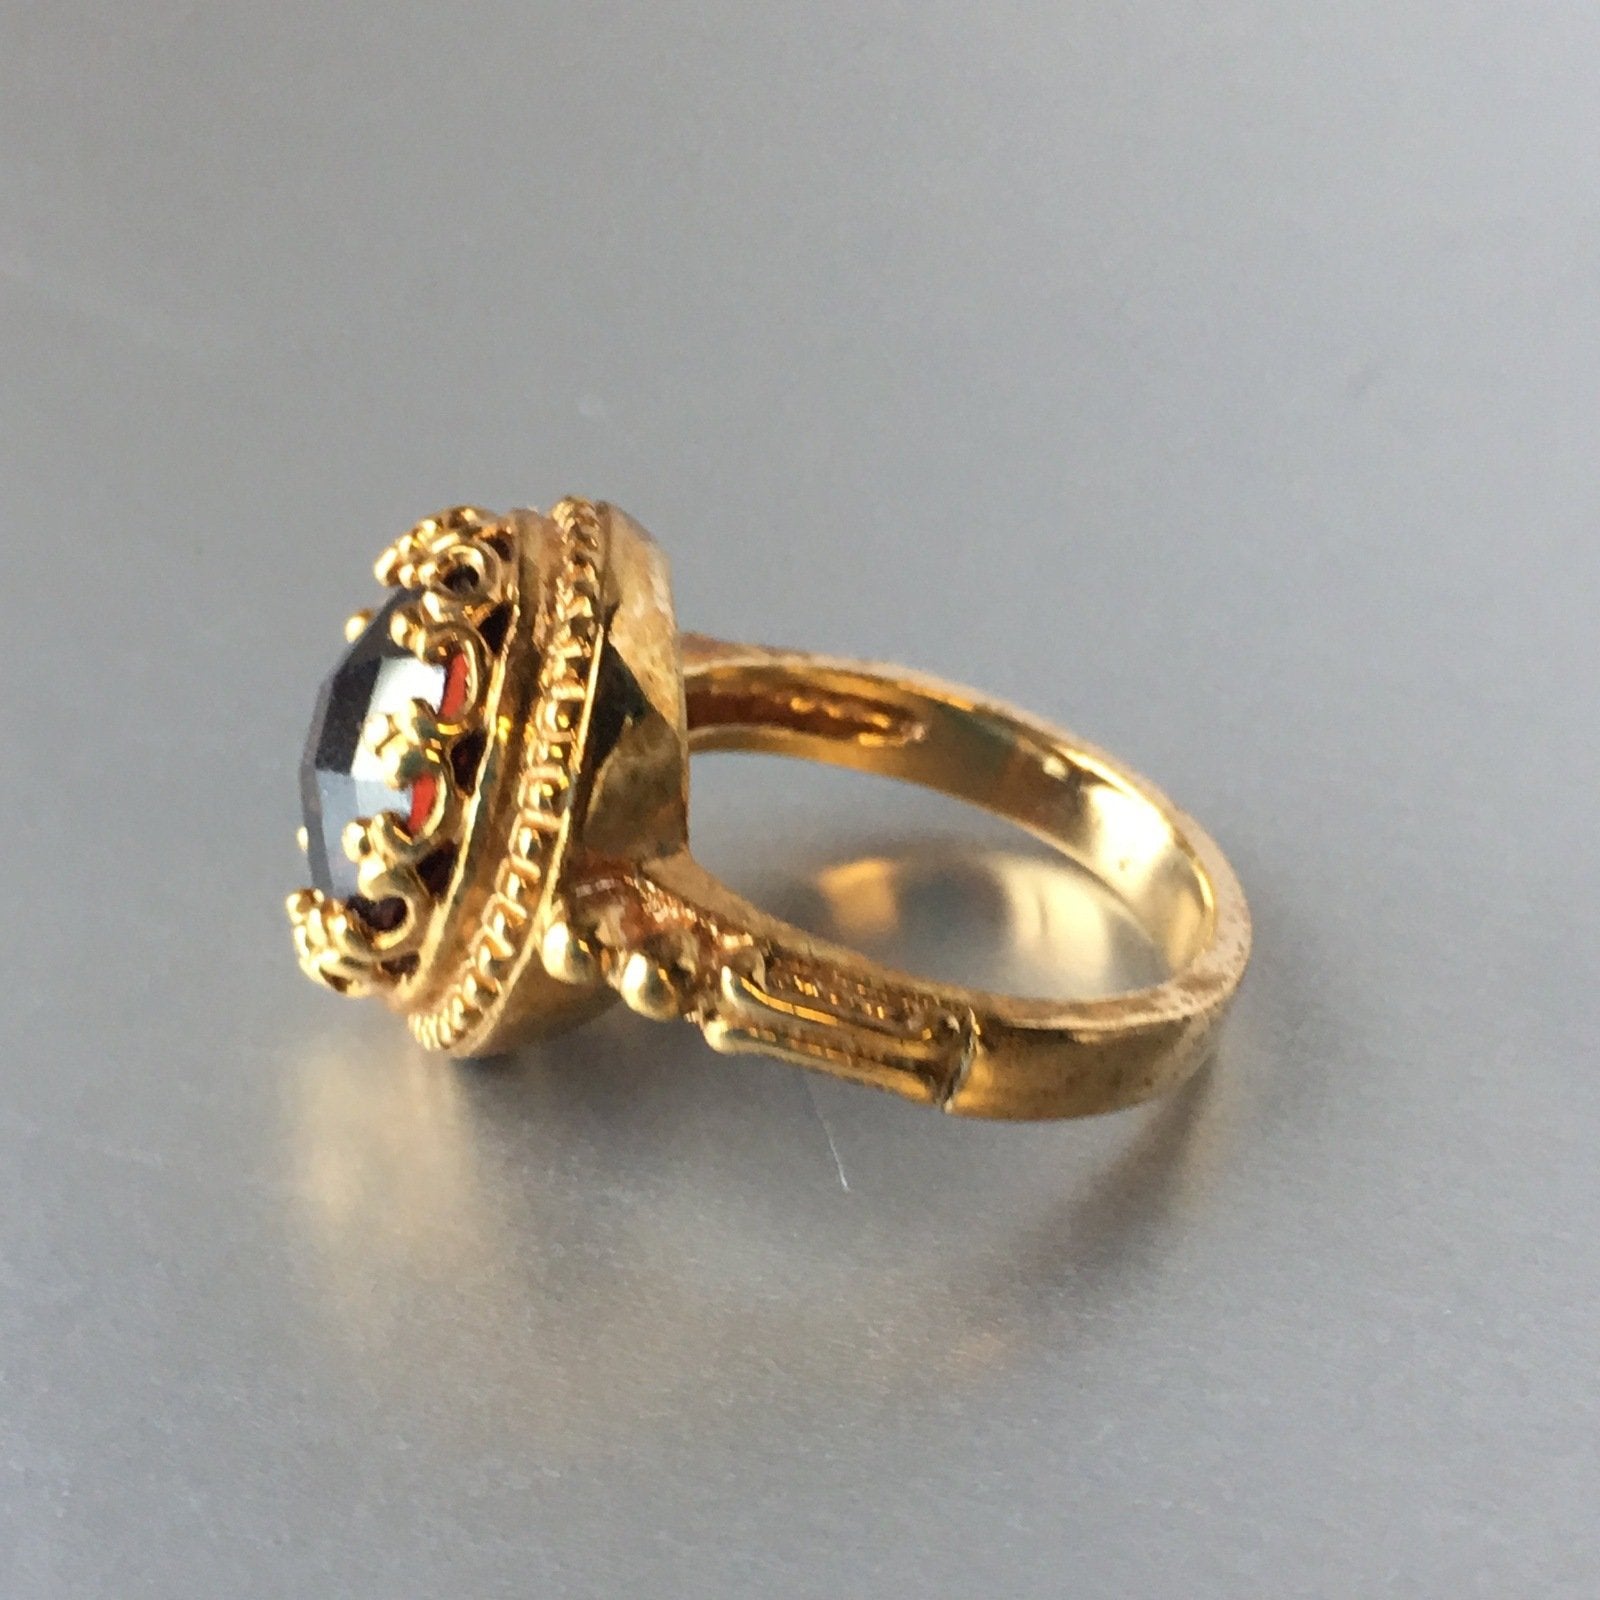 Victorian High Cocktail Ring Vintage Jewelry